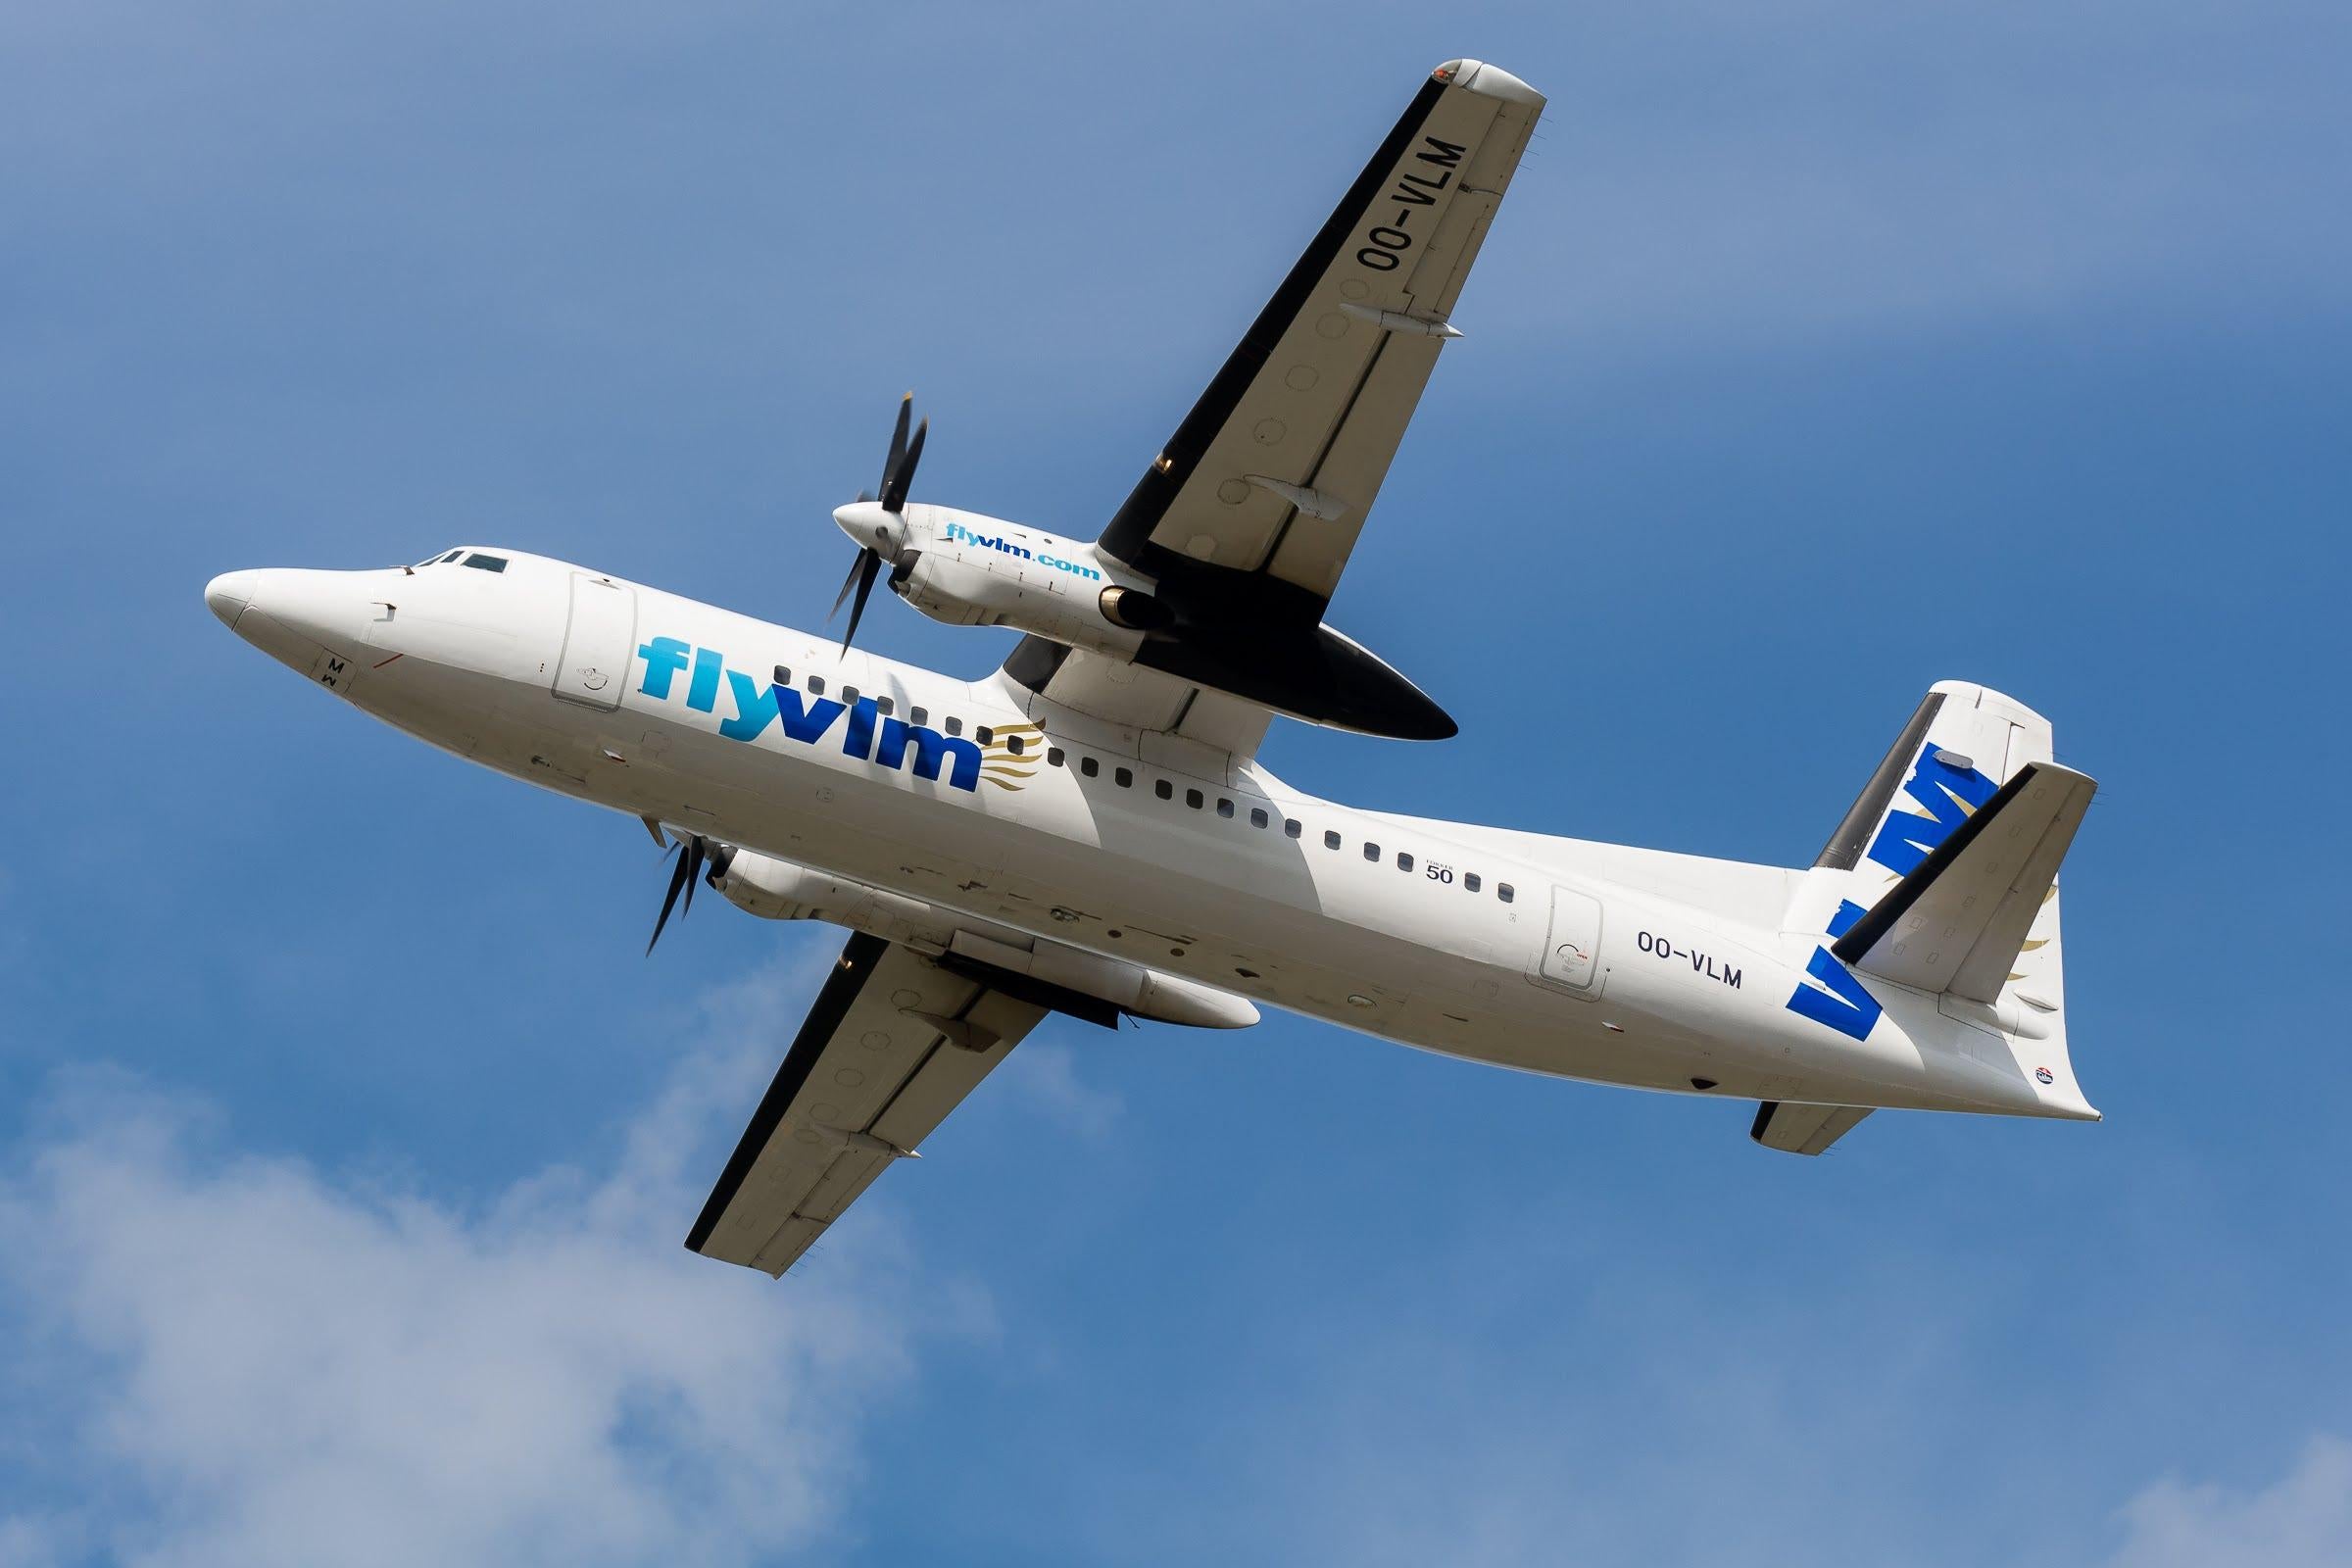 North-west connection: a VLM Fokker 50 aircraft will fly daily from Manchester to ‘Bruges-Ostend’ airport